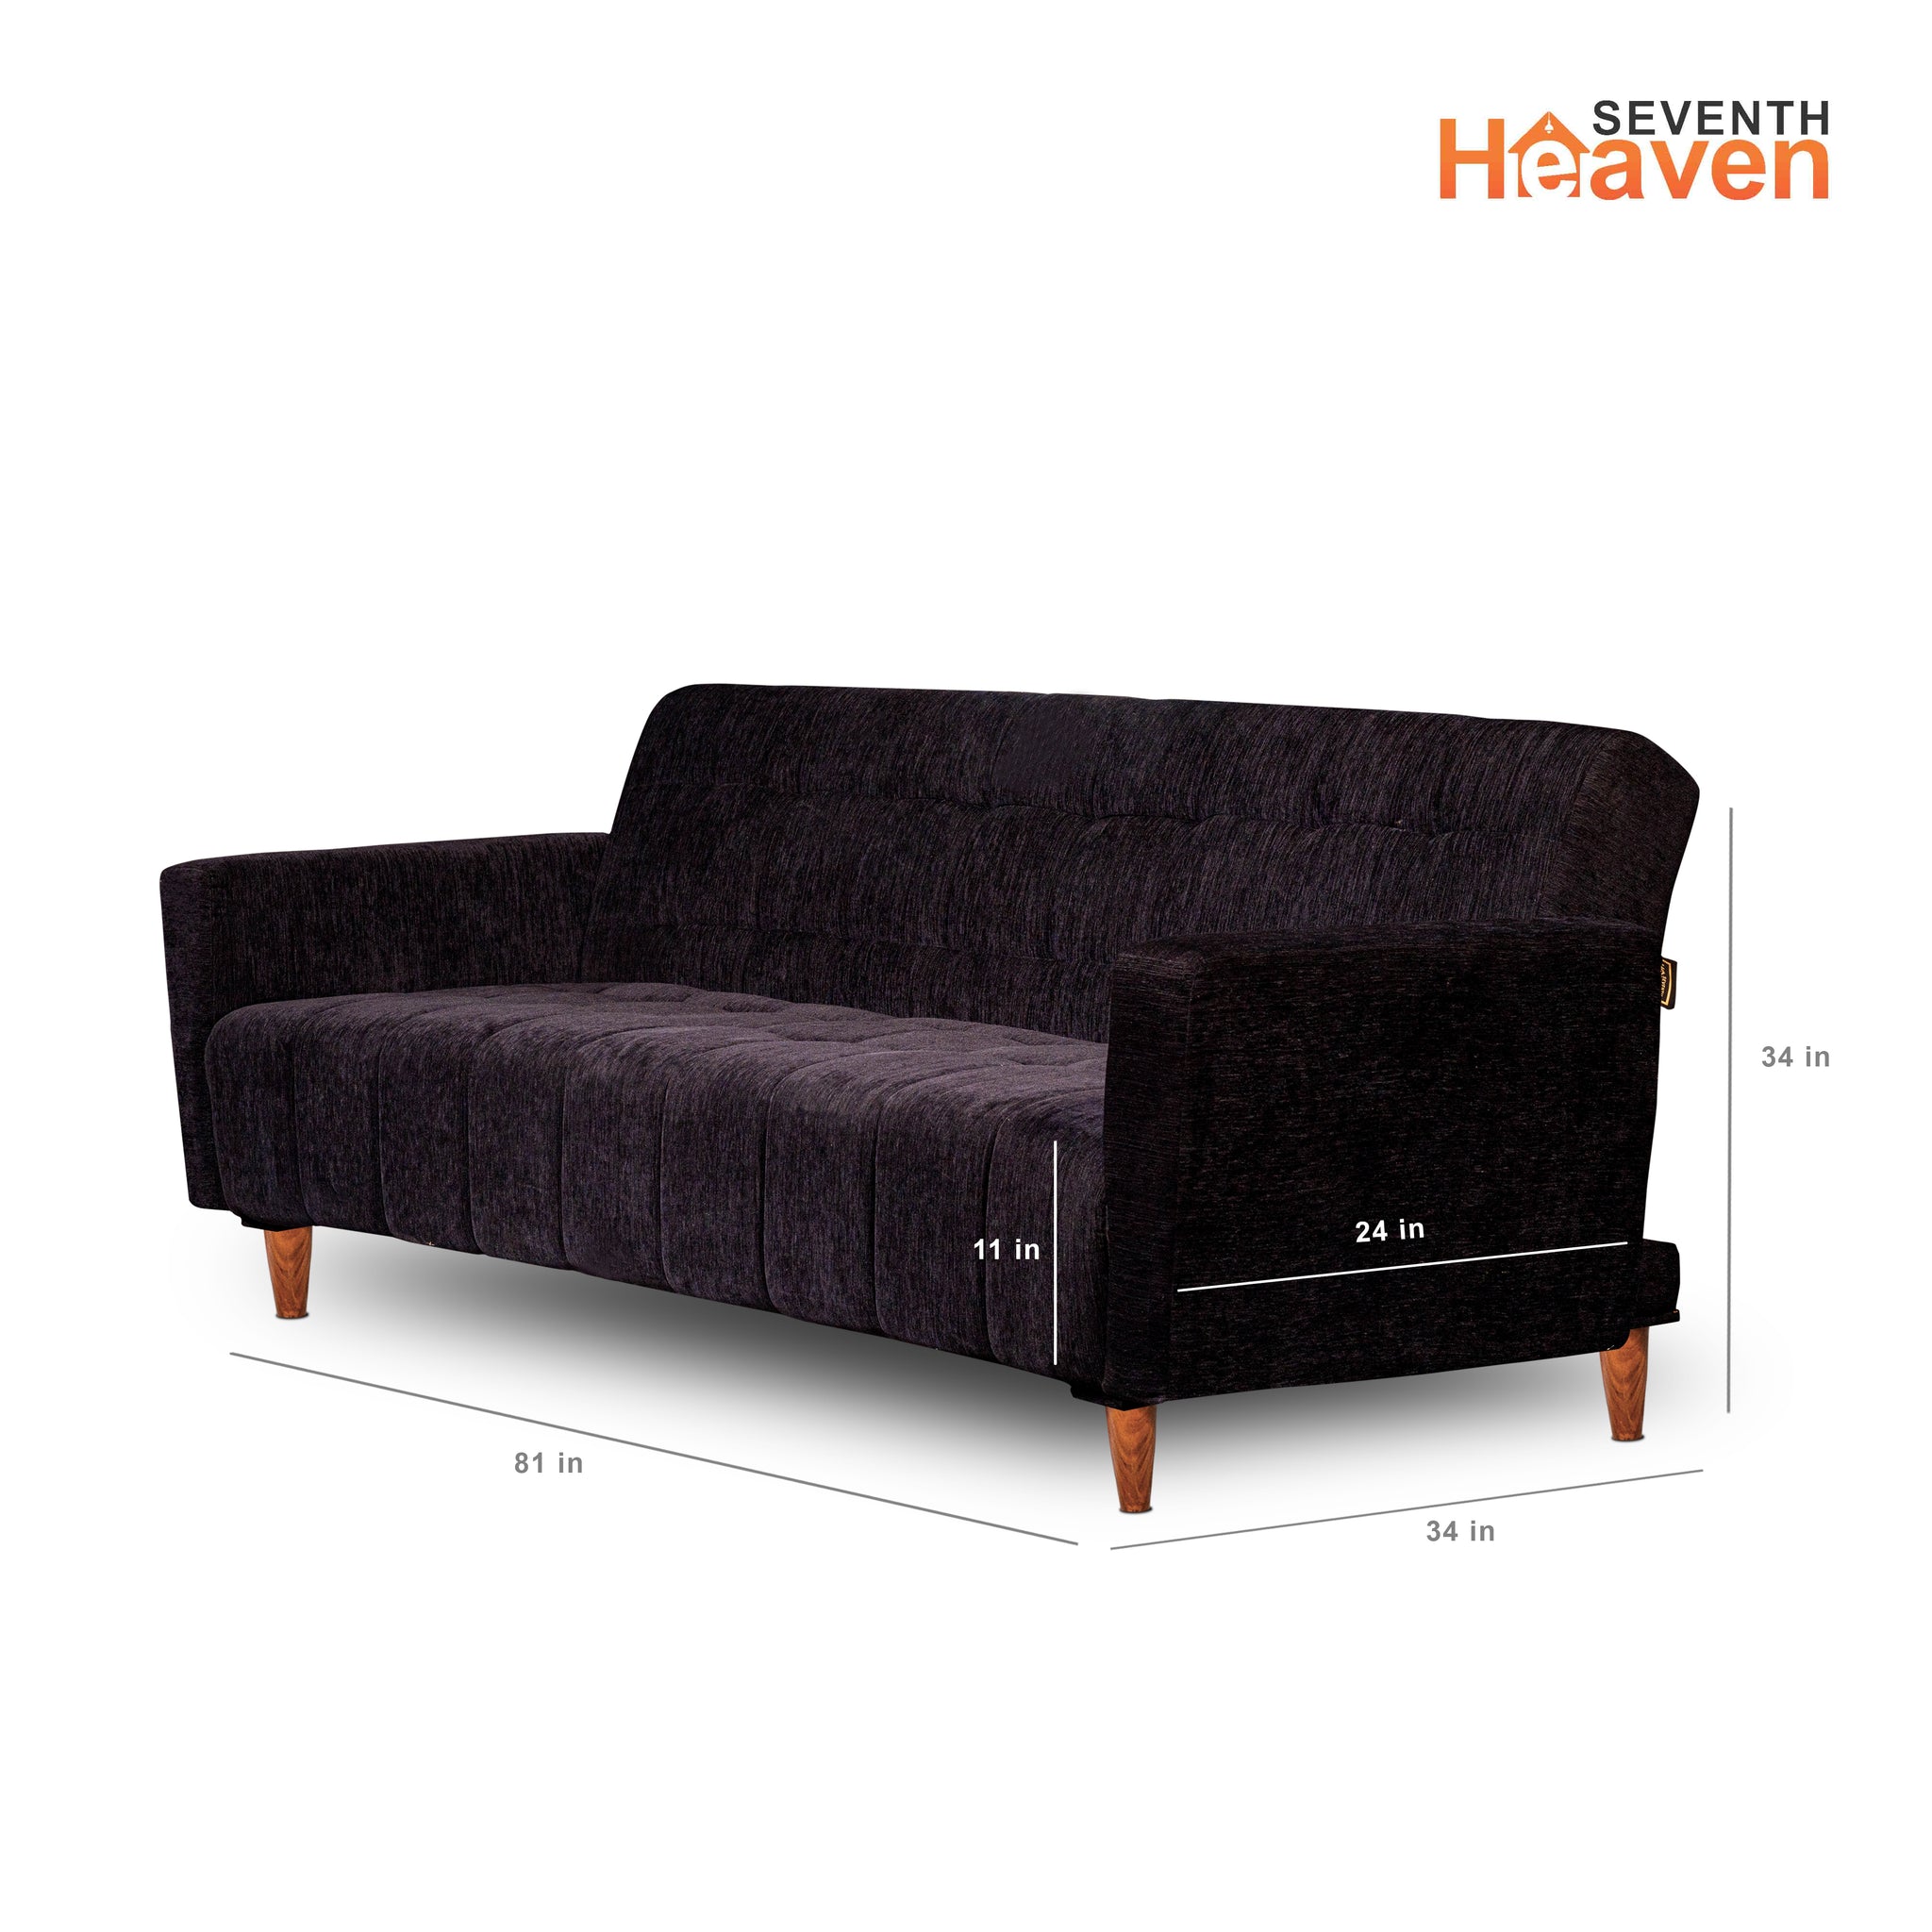 Lisbon 4 Seater (72"X44"X16") Wooden Sofa cum Bed with Armrest Double Solid Wood (Black)